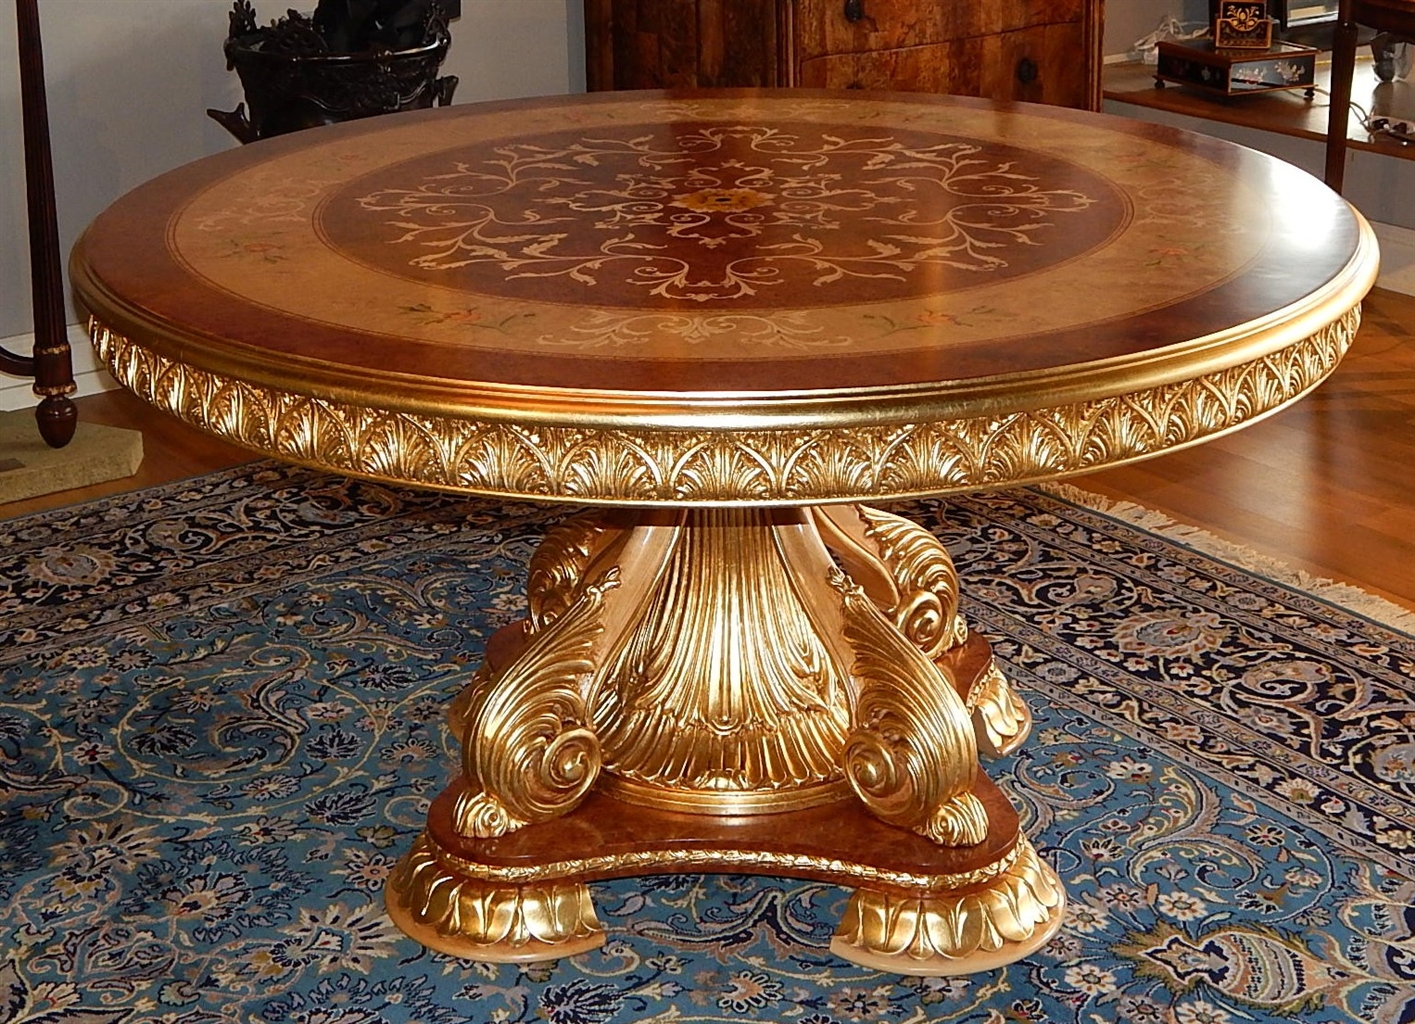 Dining Tables 11 Luxury foyer center table. Exquisite marquetry and detail work.